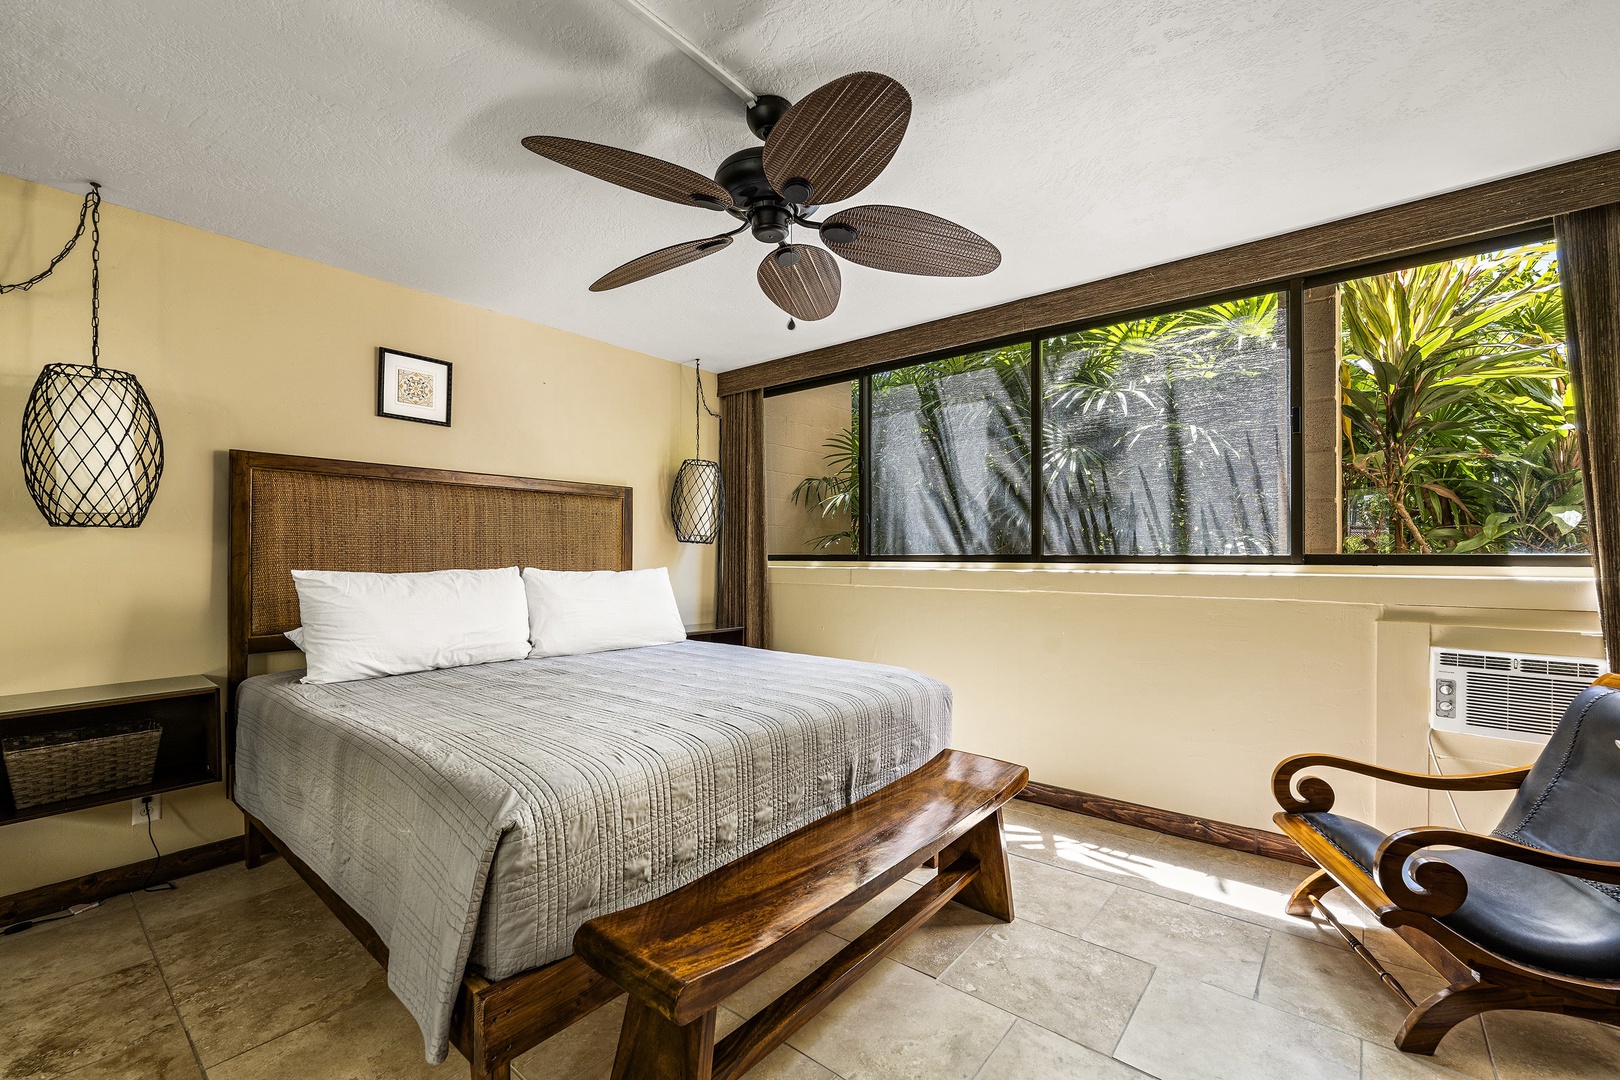 Kailua Kona Vacation Rentals, Kona Makai 2103 - Luxurious King sized bed in the bedroom with green scape out the window